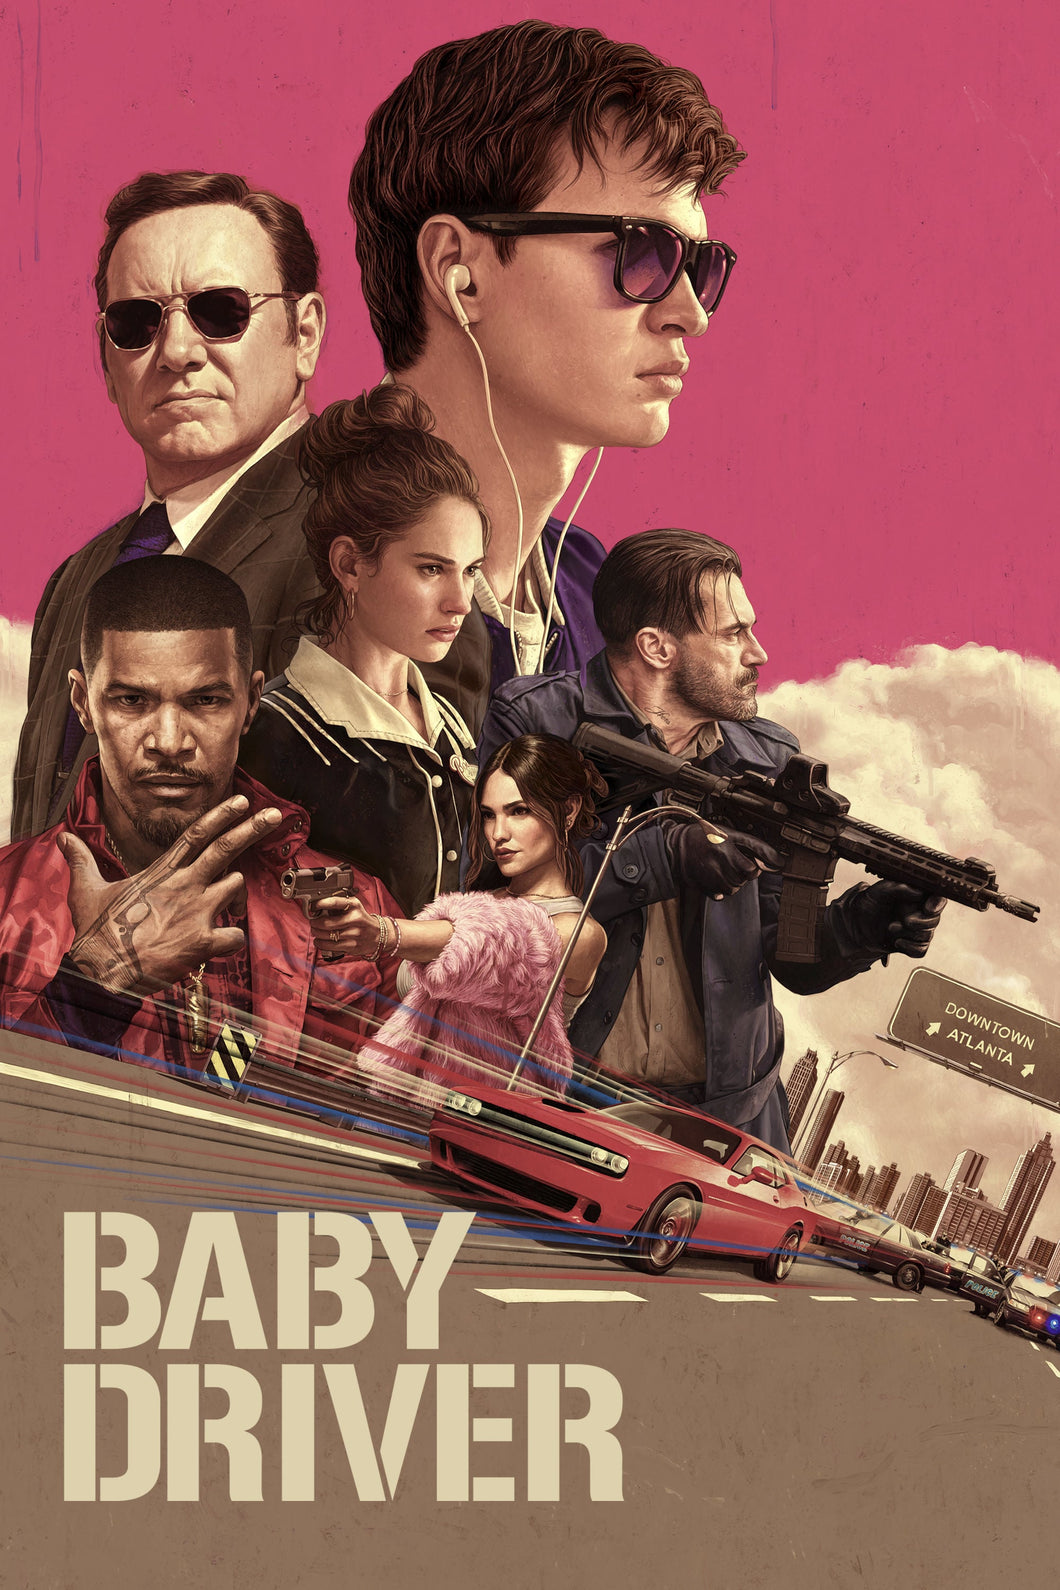 Baby Driver (2017) Movie Poster High Quality Glossy Paper A1 A2 A3 A4 A3 Framed or Unframed!!!